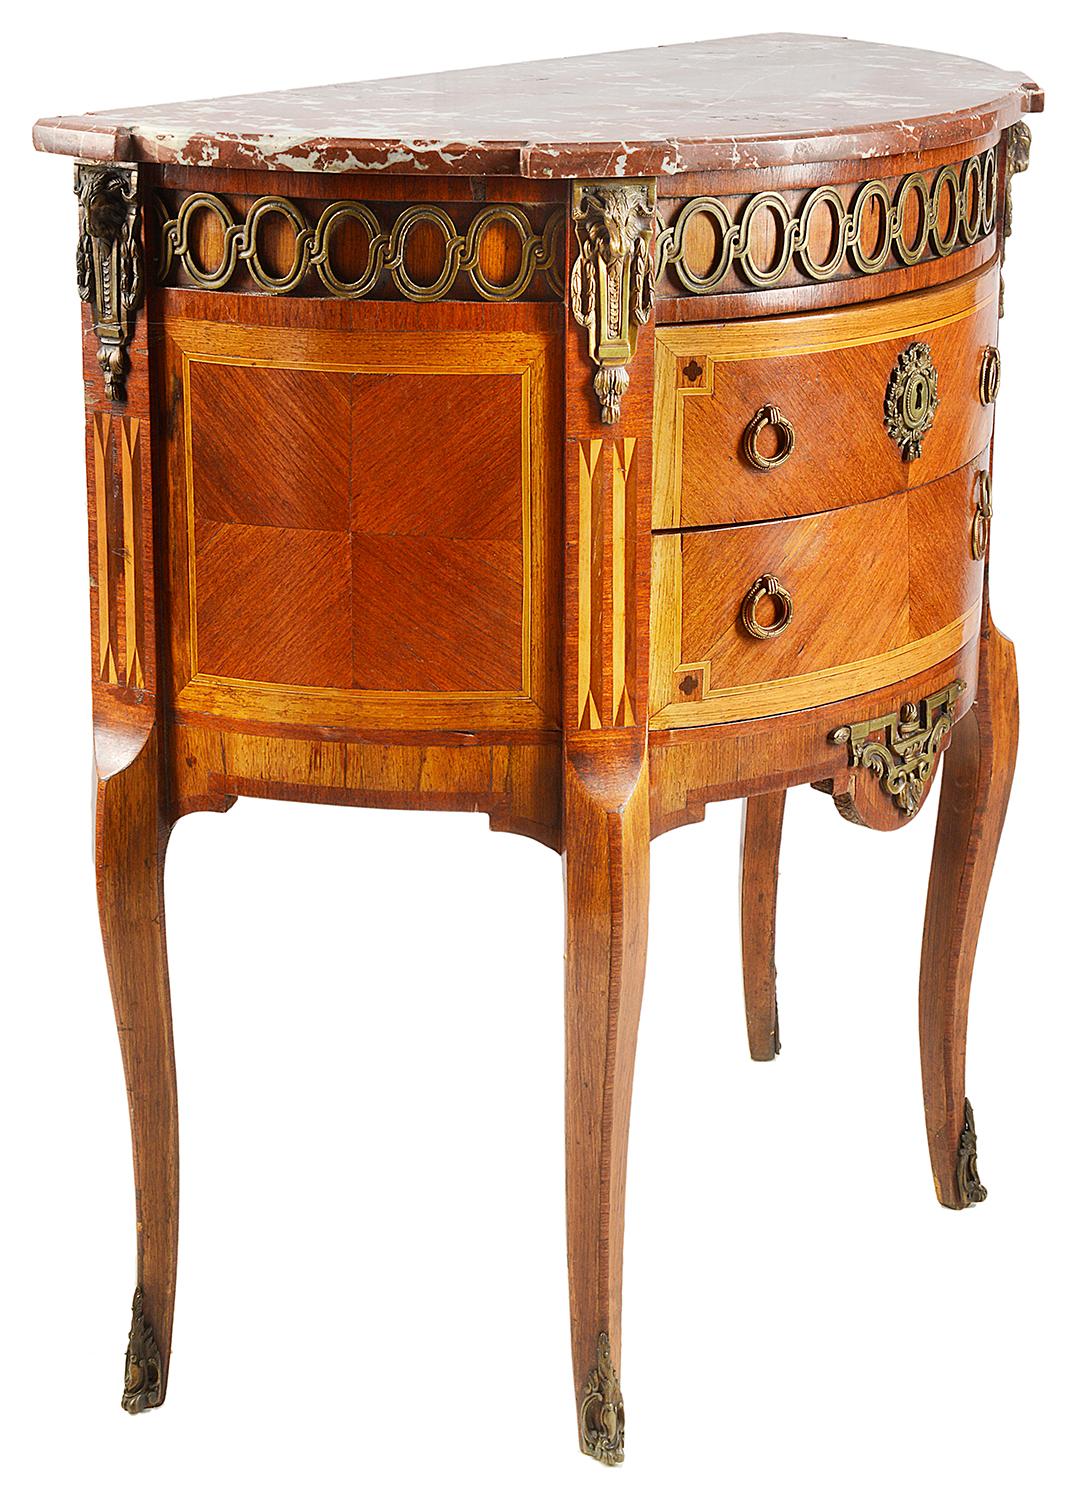 A good quality early 20th century Louis XVI style French commode. Having its original rouge colored marble top, ormolu mounts to the frieze and apron. Two bow fronted drawers each with boxwood inlaid decoration to the crossbanding, raised on elegant